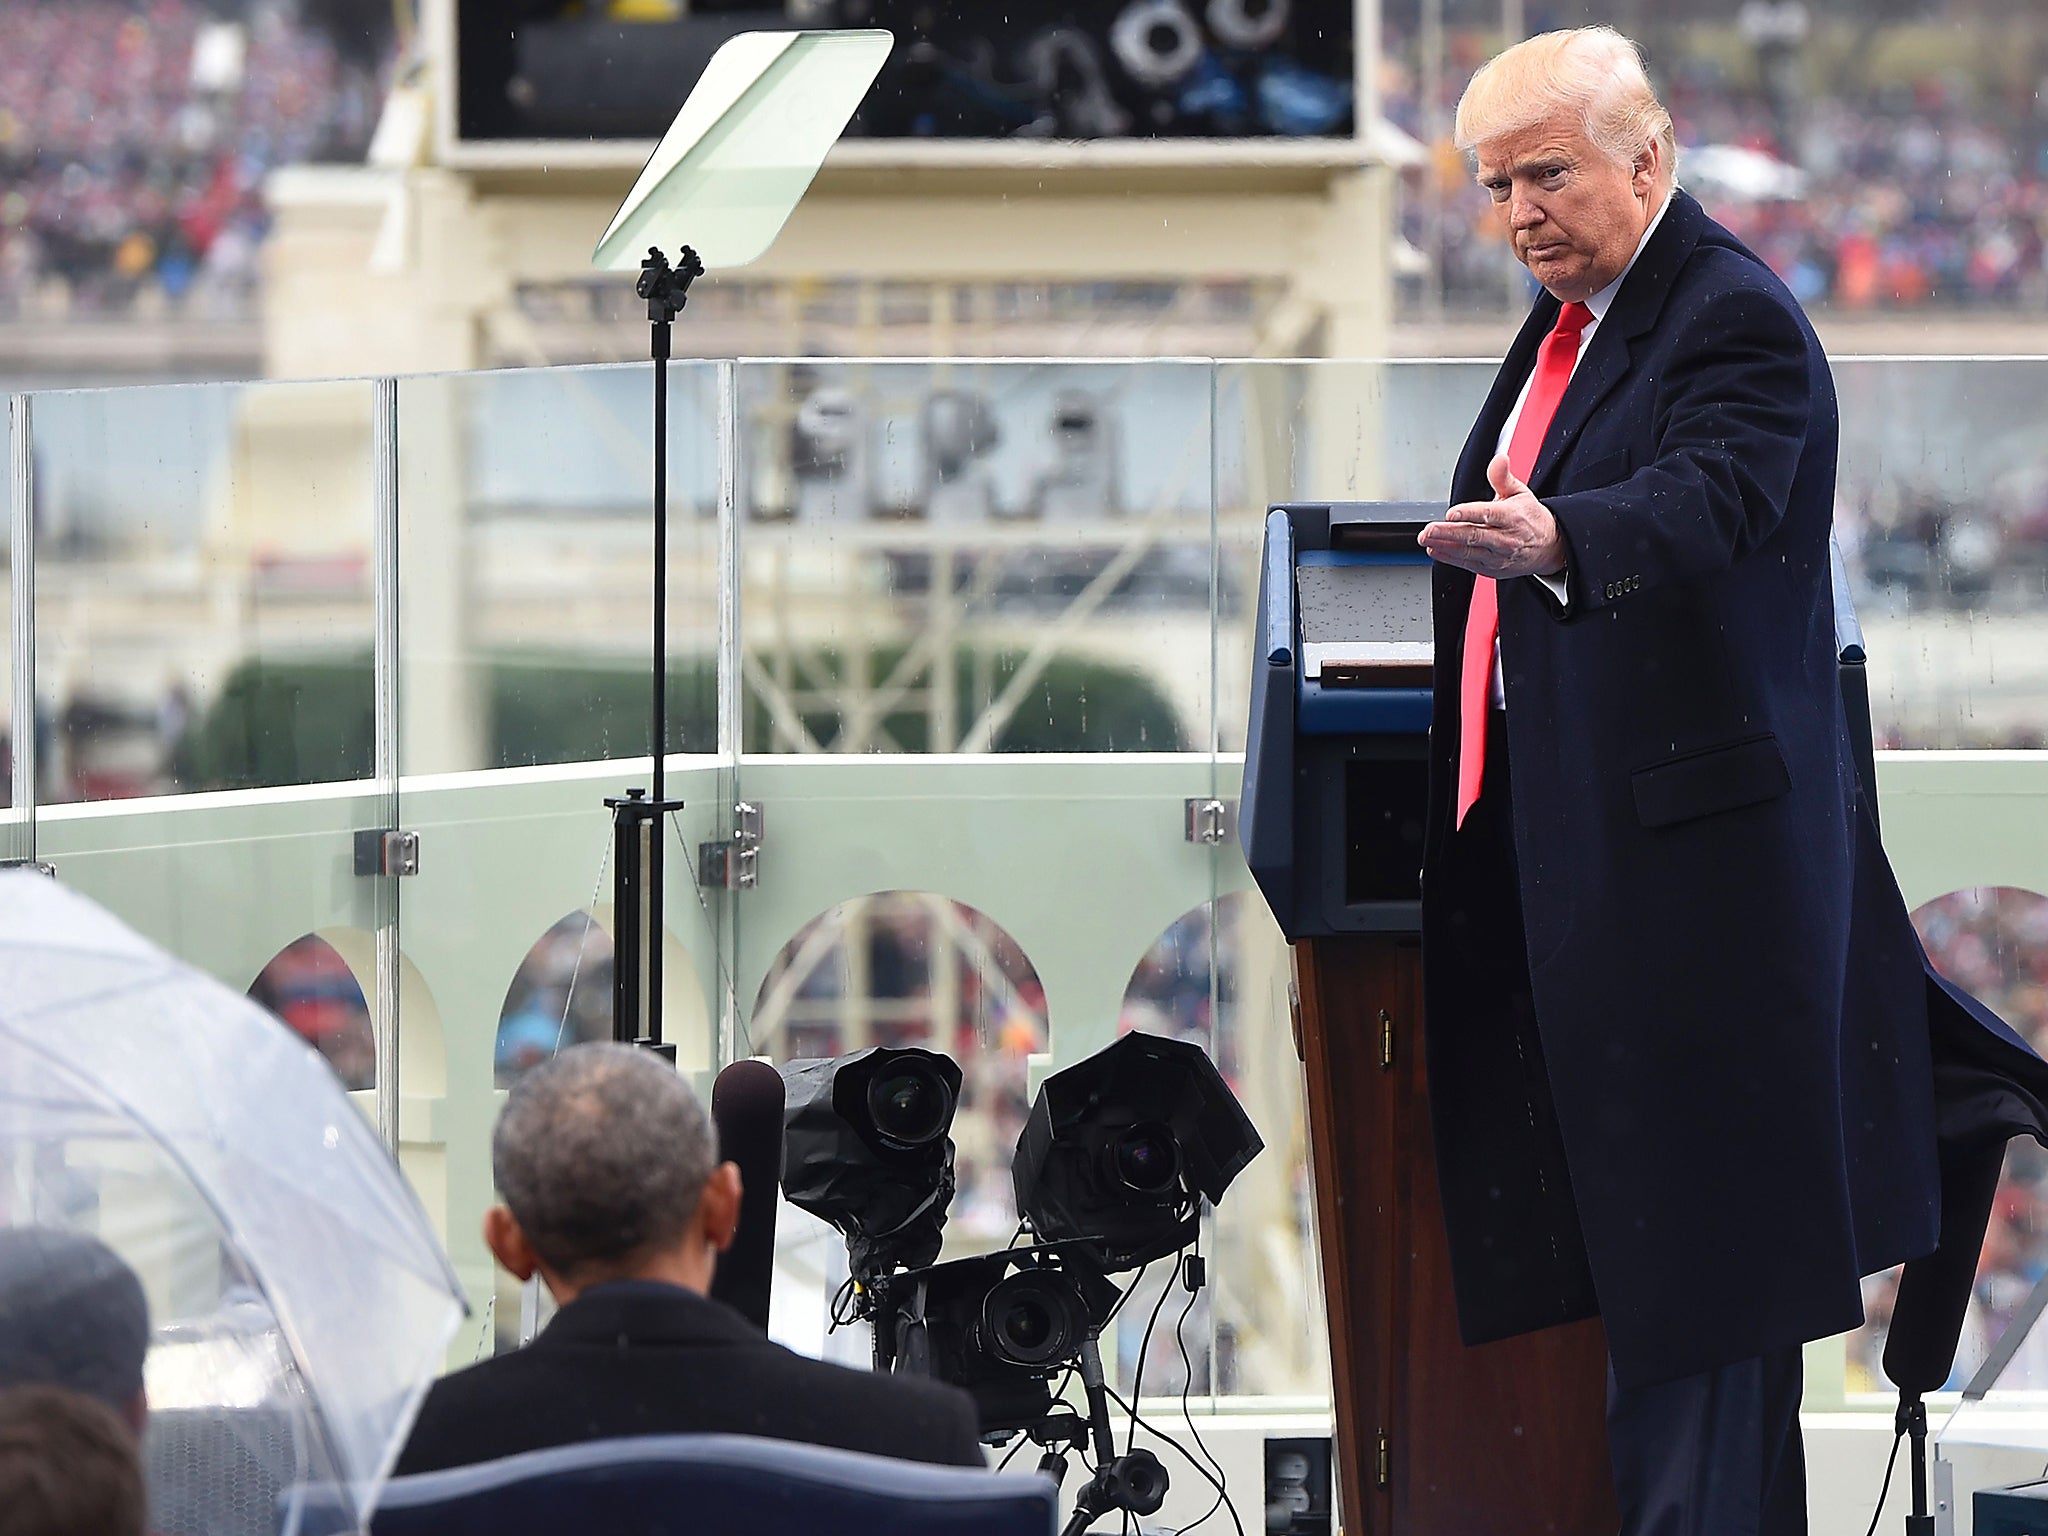 US President Donald Trump thanks former US President Barack Obama during the Presidential Inauguration at the US Capitol in Washington DC